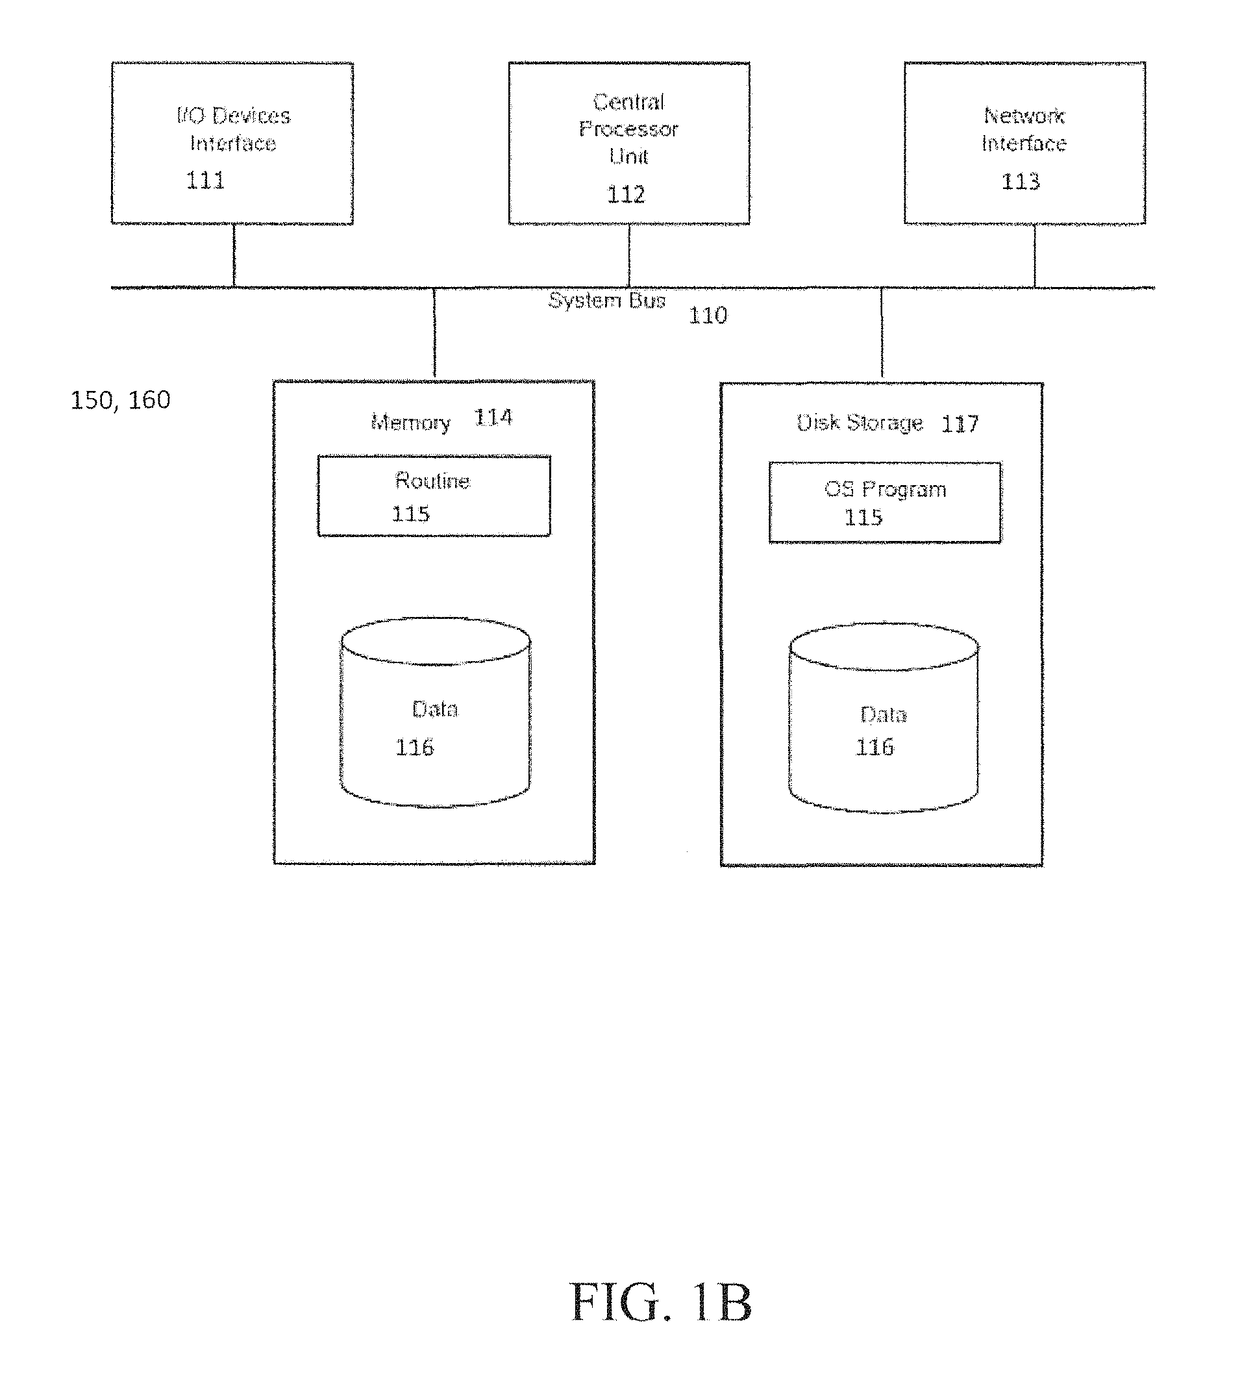 Locking applications and devices using secure out-of-band channels